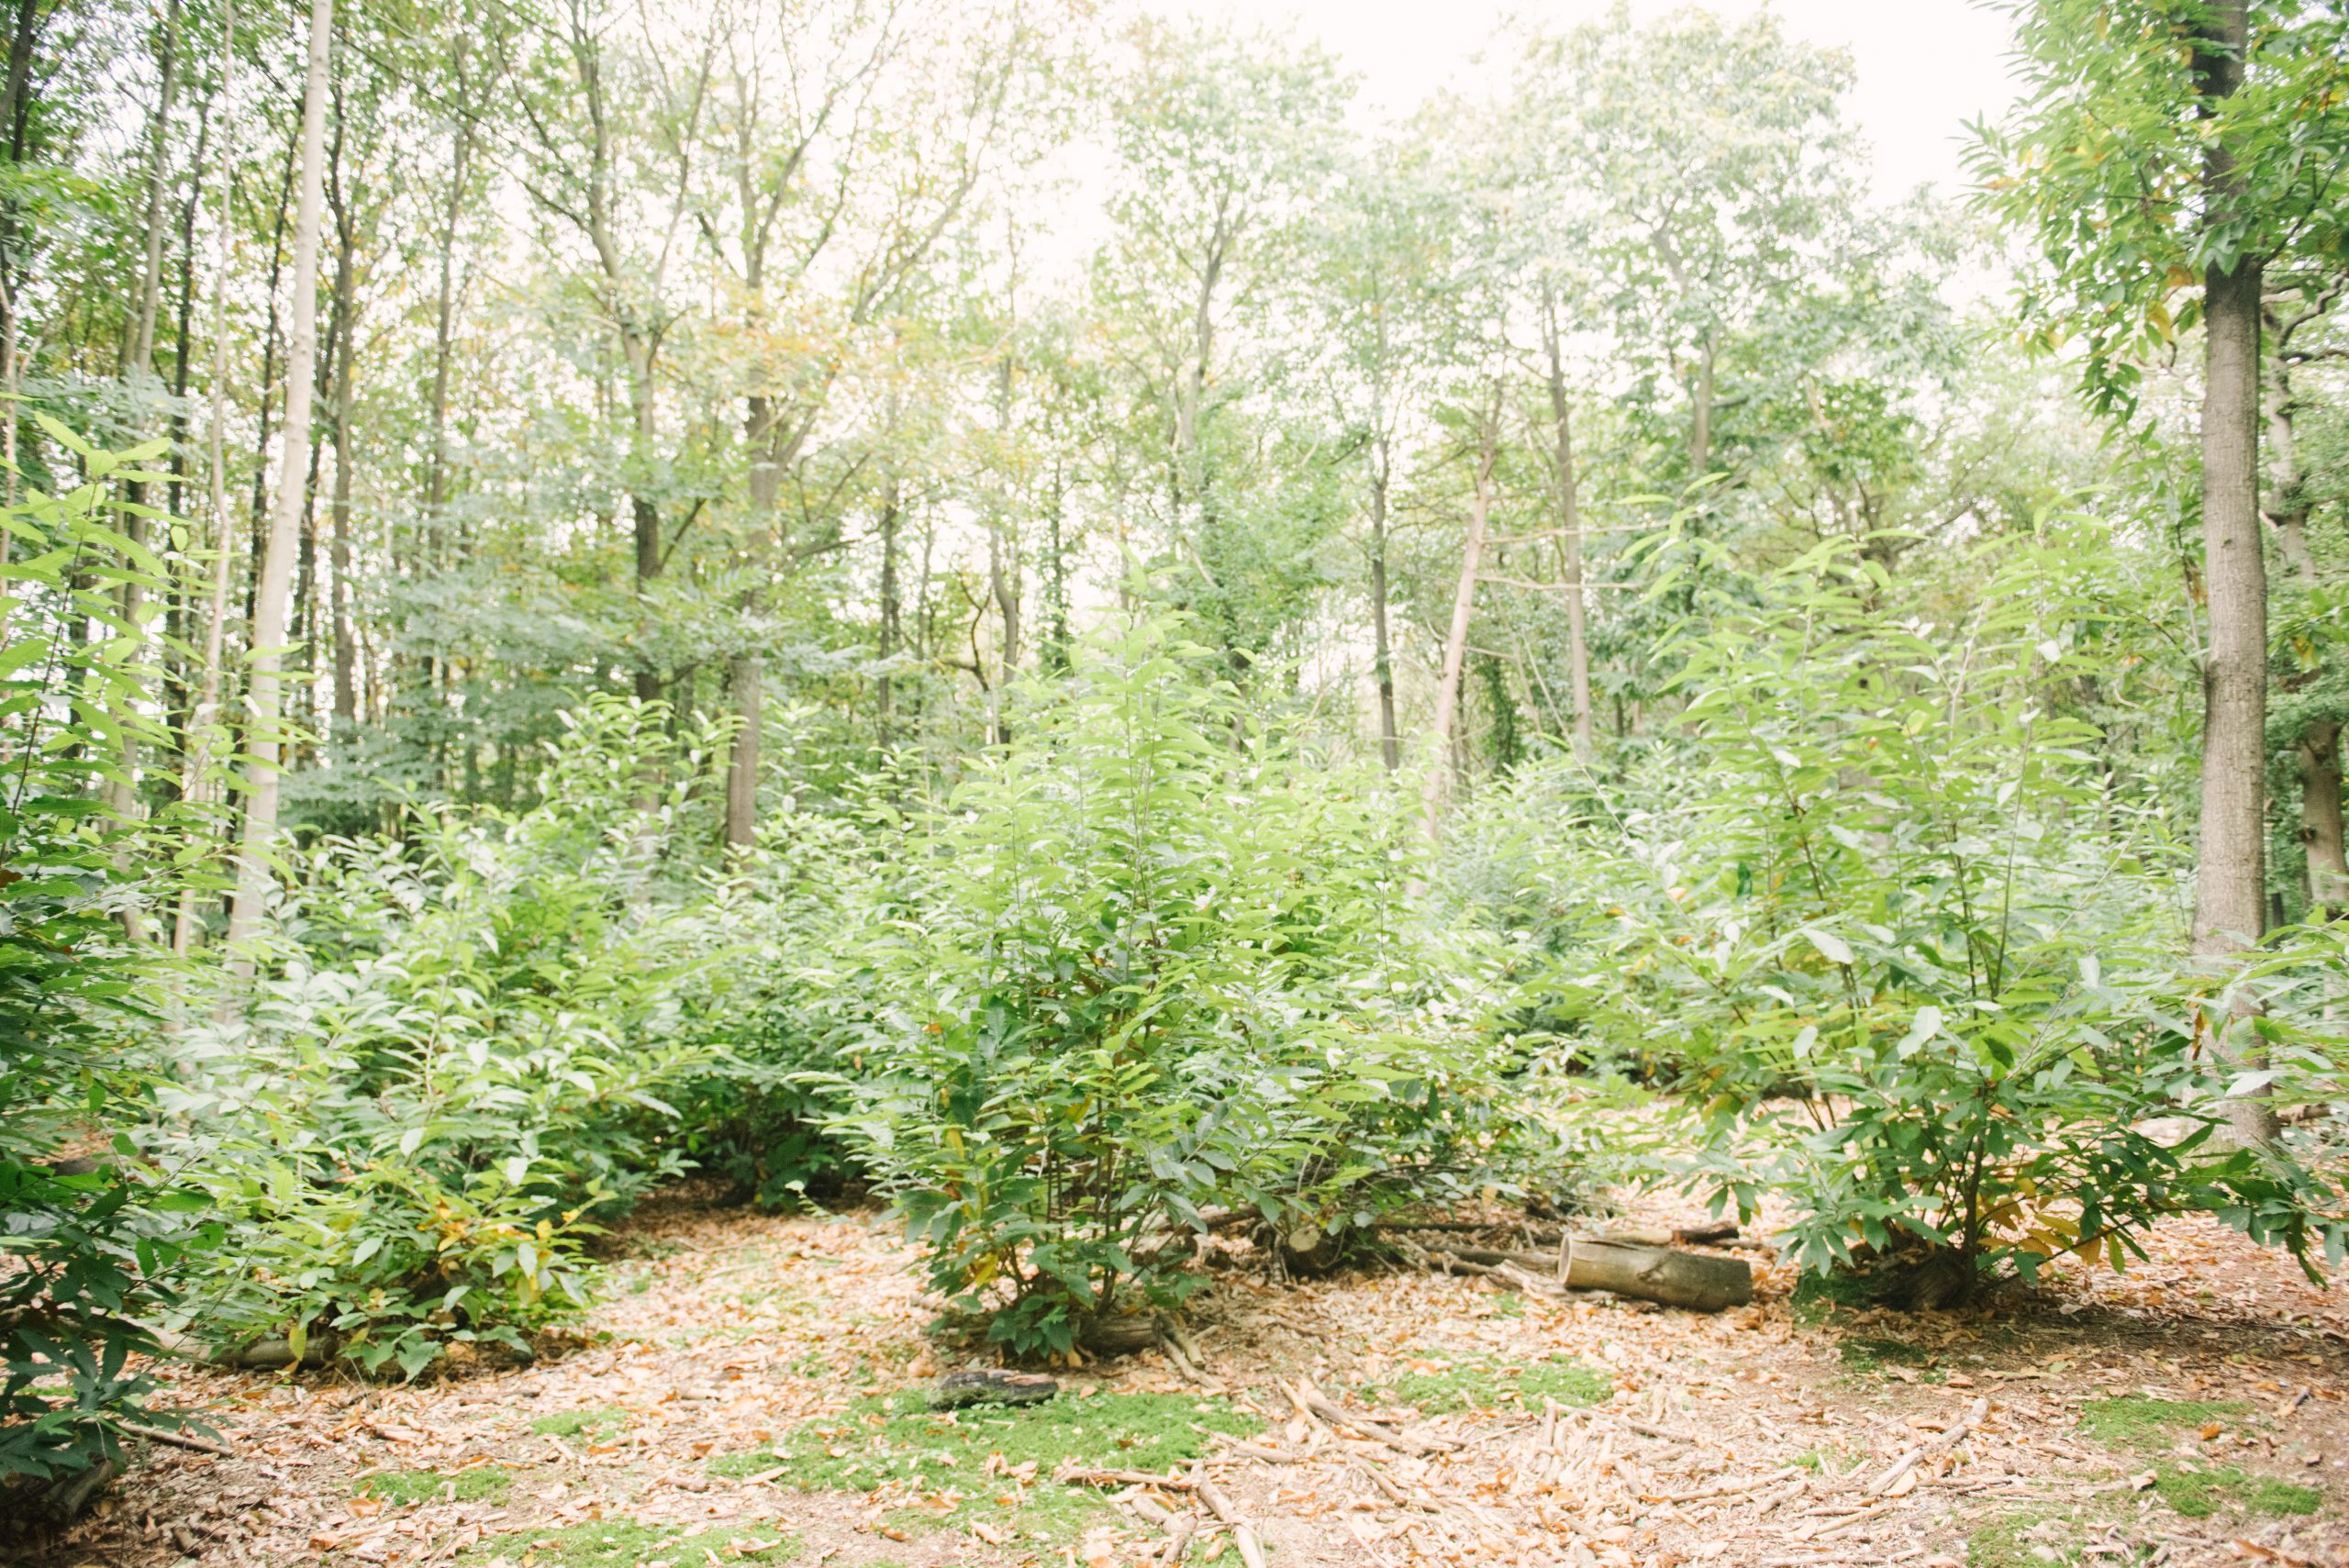 Woodland glade for burial or ash memorial